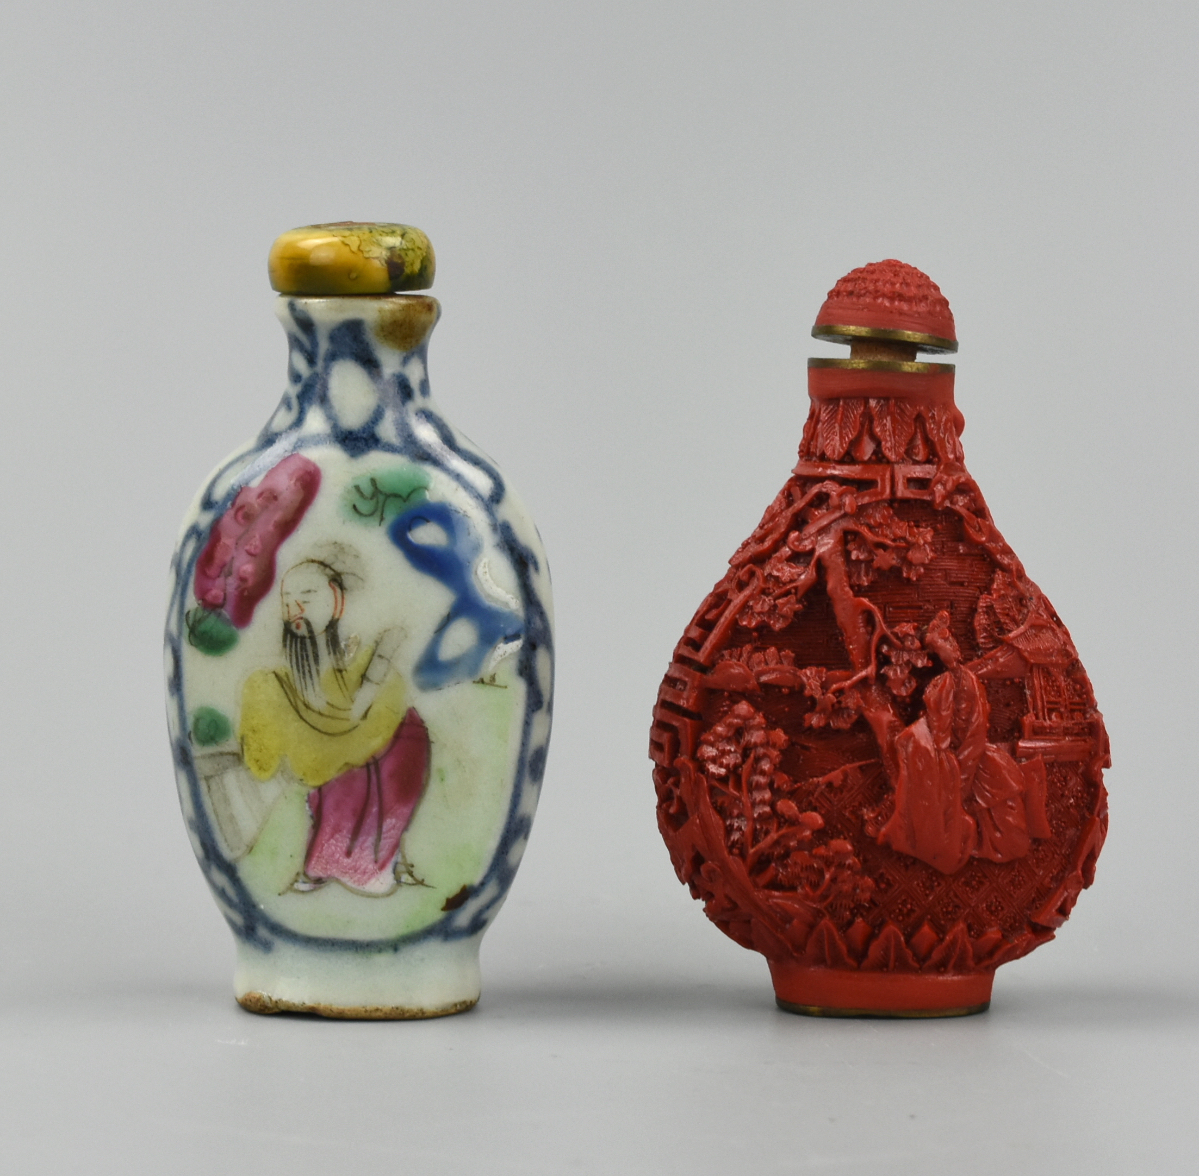 2 CHINESE SNUFF BOTTLES,19-20TH